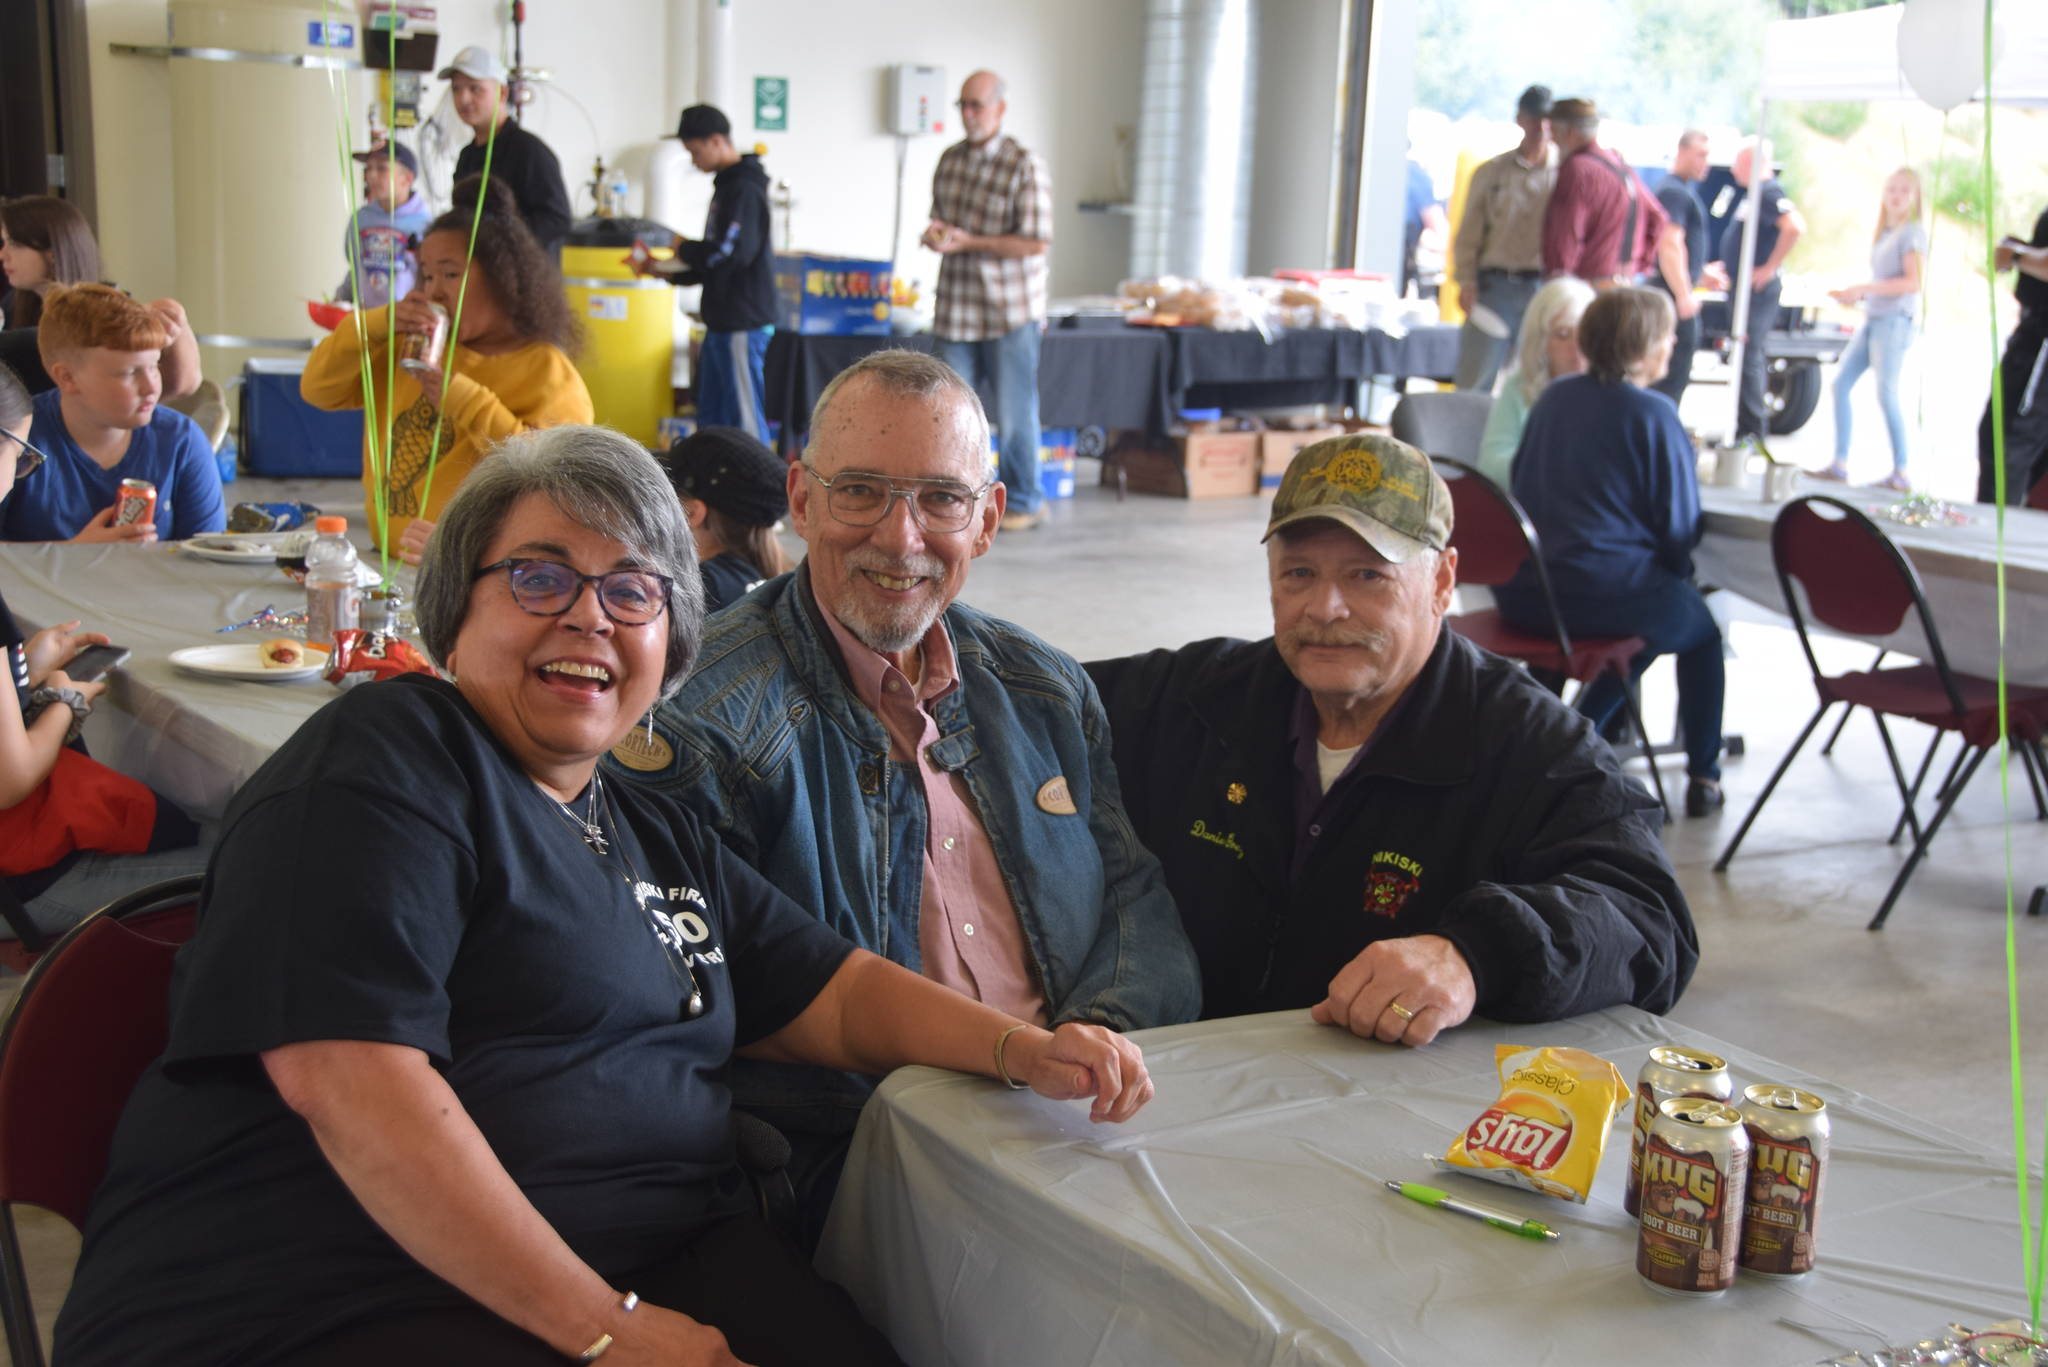 From left, Terry Carter, Dave Unruh, and Dan Gregory smile for the camera at Fire Station #2 during the Nikiski Fire Department’s 50th anniversary celebration in Nikiski, Alaska on July 15, 2019. Carter has been the front desk receptionist for the department for 30 years. Unruh is a retired captain and was the second person employed by the department, and Gregory was was fire chief from 2000 to 2005. (Photo by Brian Mazurek/Peninsula Clarion)